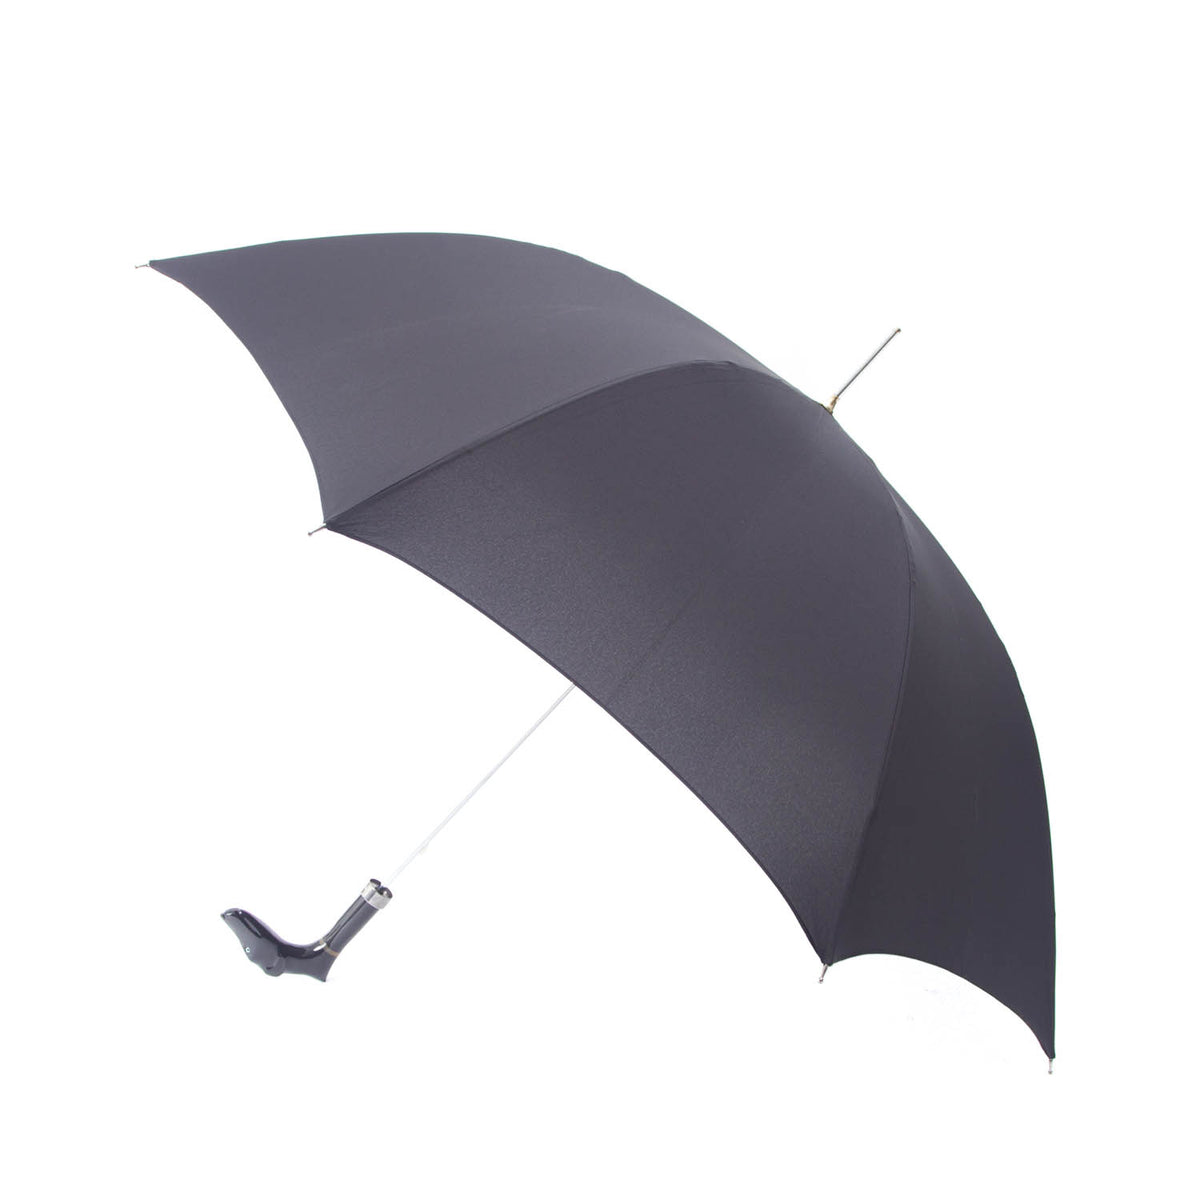 A Mario Talarico Black Canopy Umbrella with Dog Horn Handle from KirbyAllison.com is open on a white background.